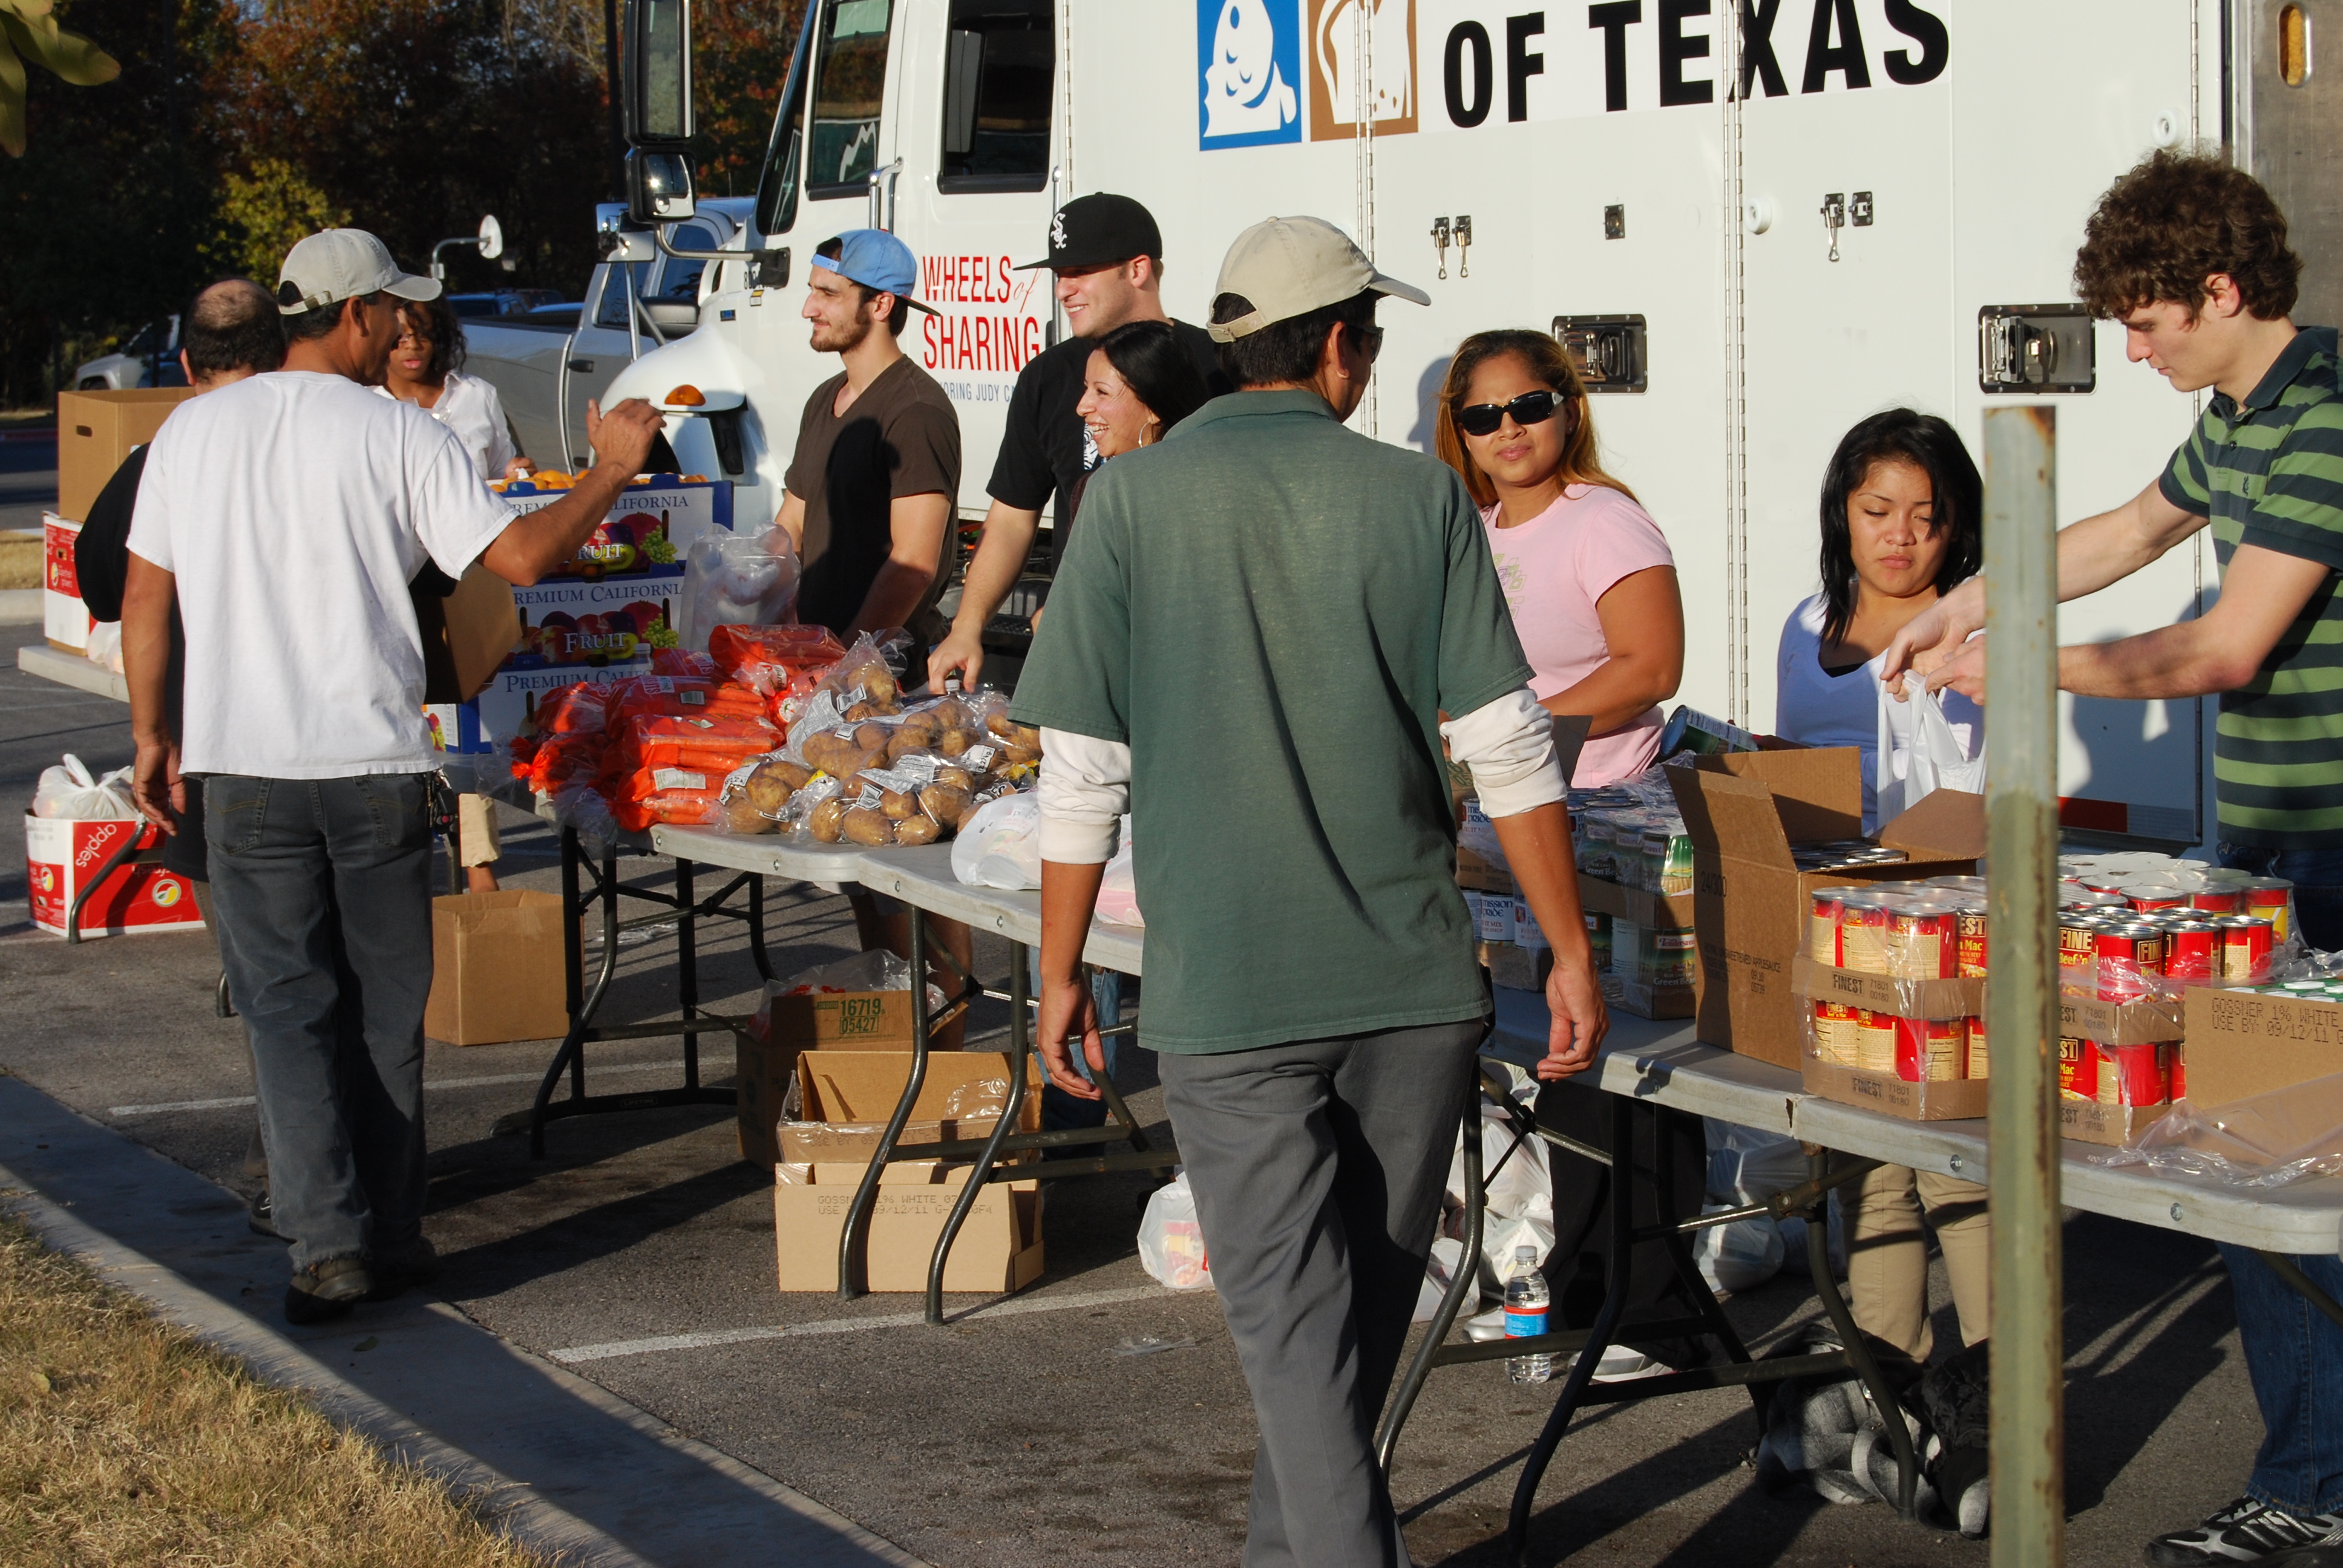 Humana Foundation donates $25,000 for relief operations in Central Texas